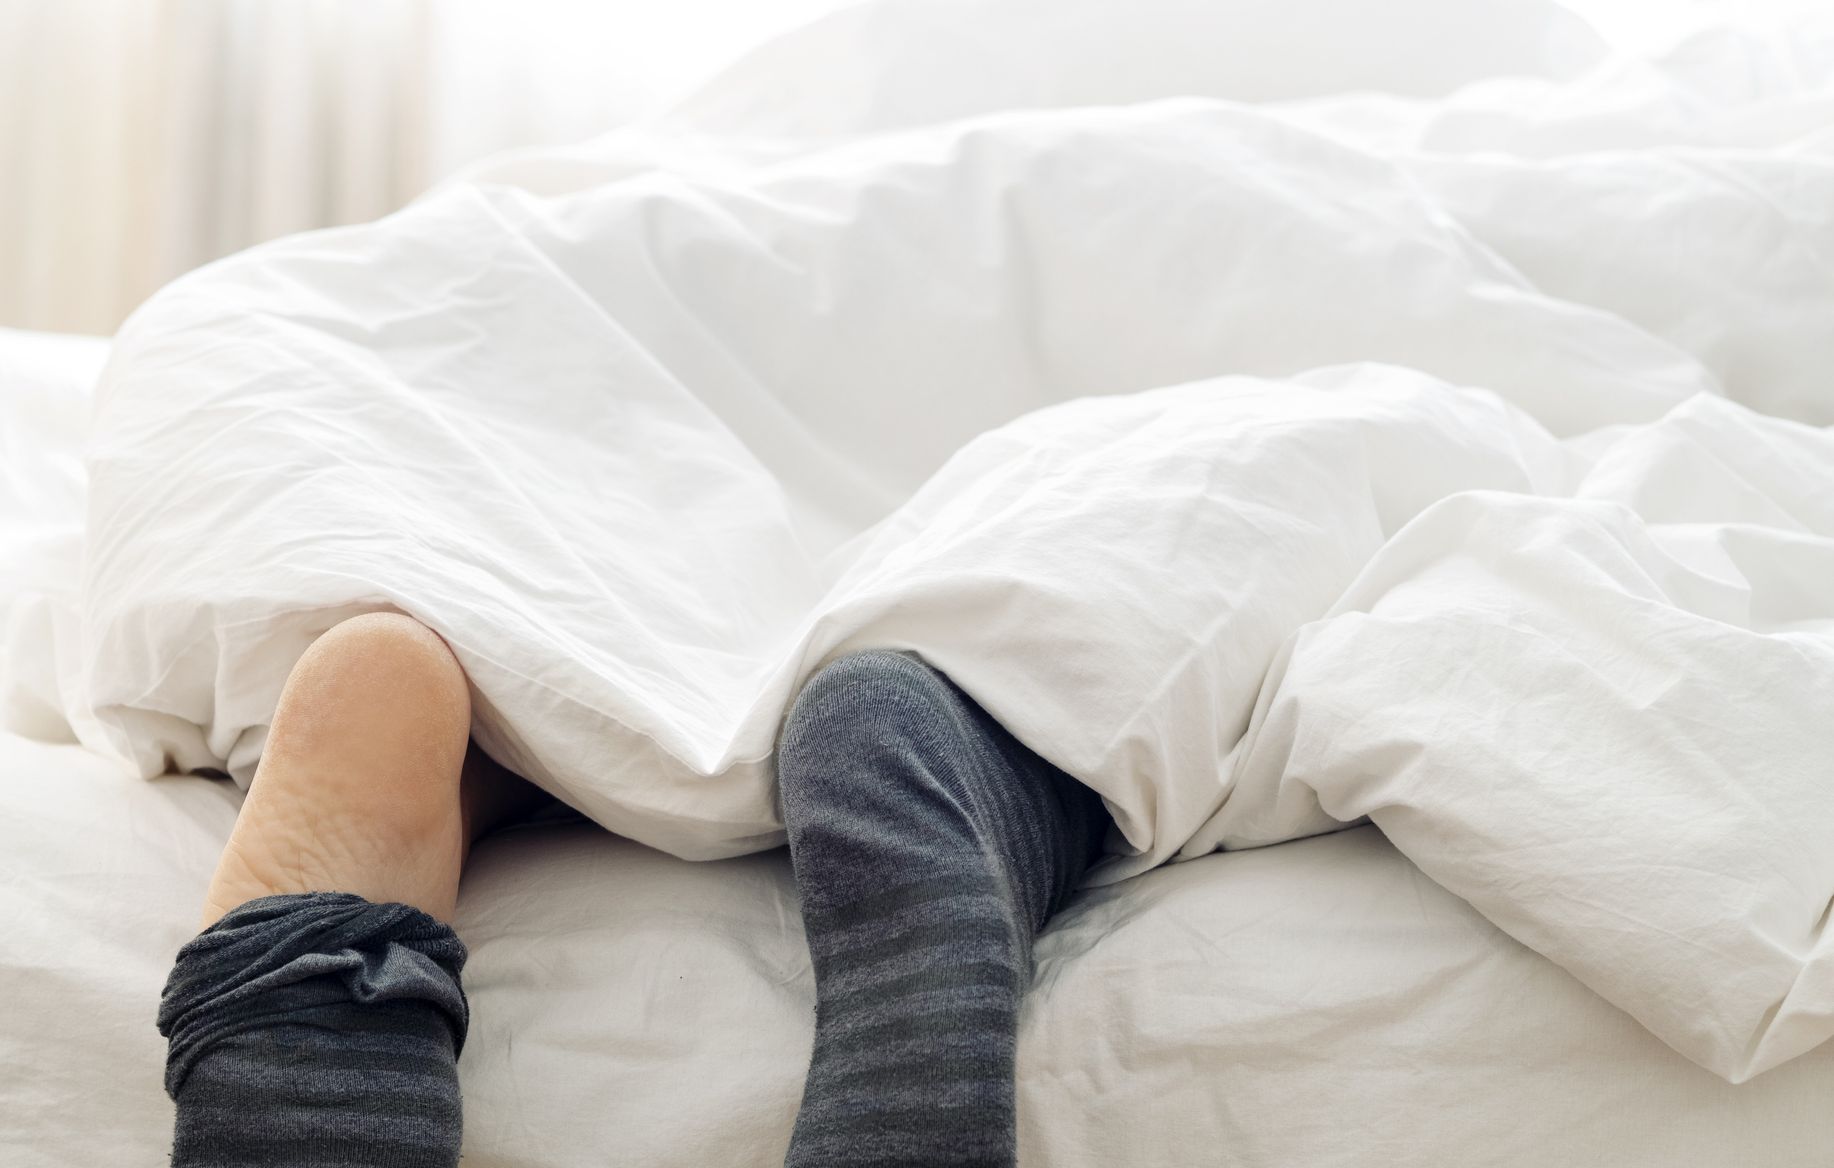 Wearing Socks In Bed Could Lead To Better Sleep